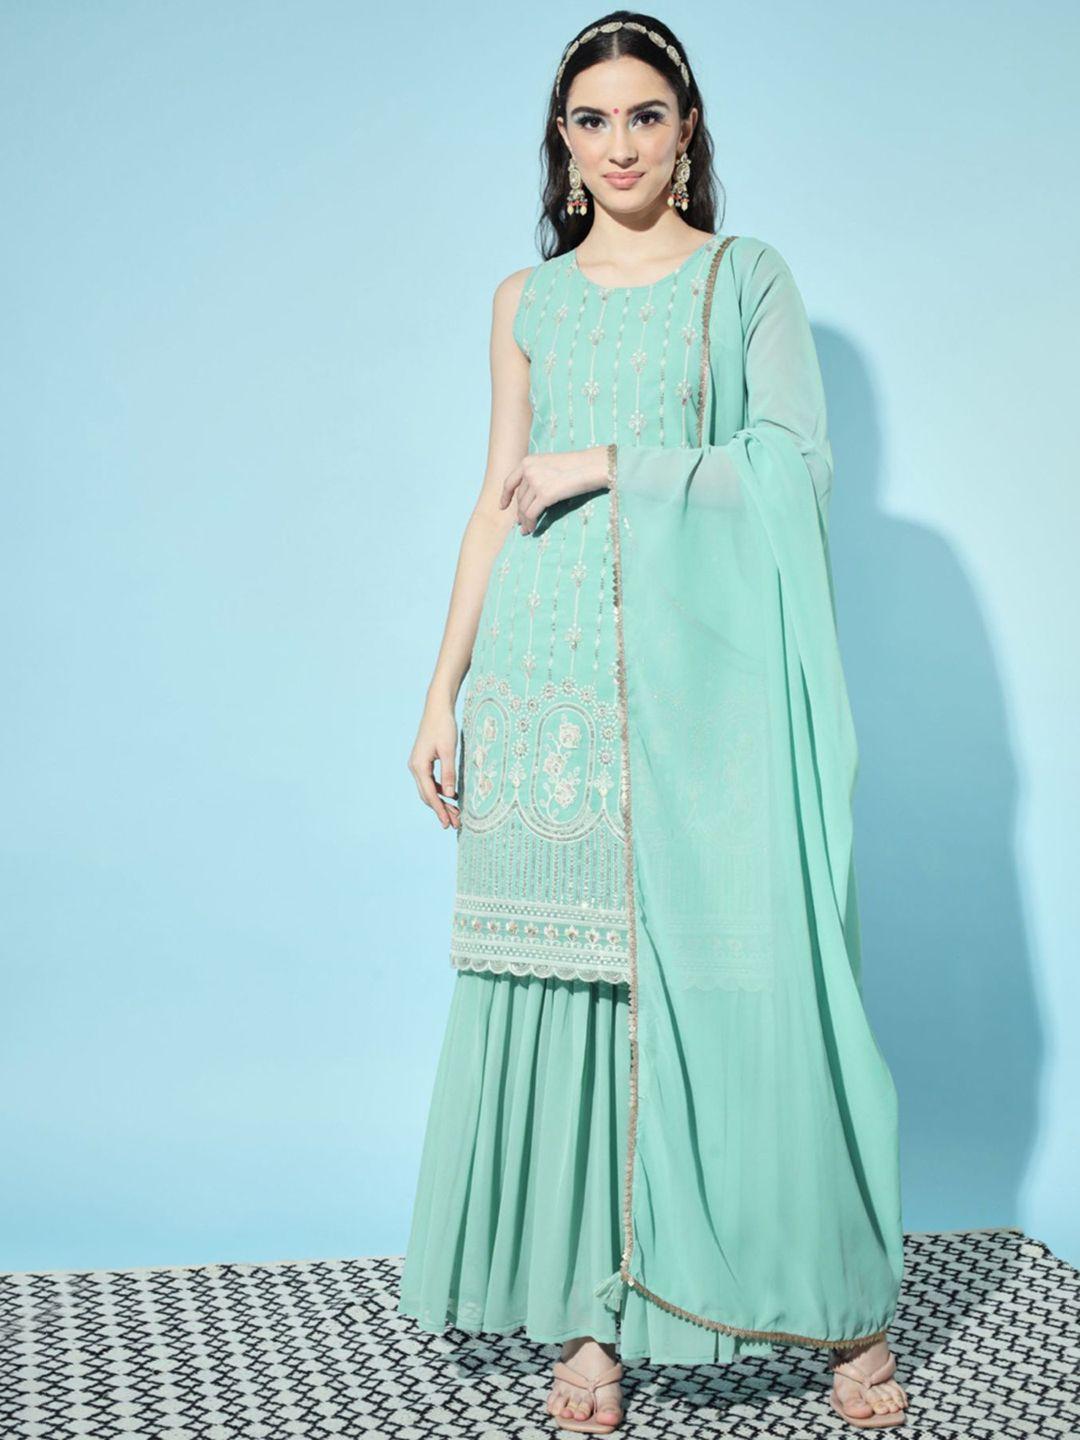 shopping queen women turquoise blue floral embroidered kurta with sharara & dupatta